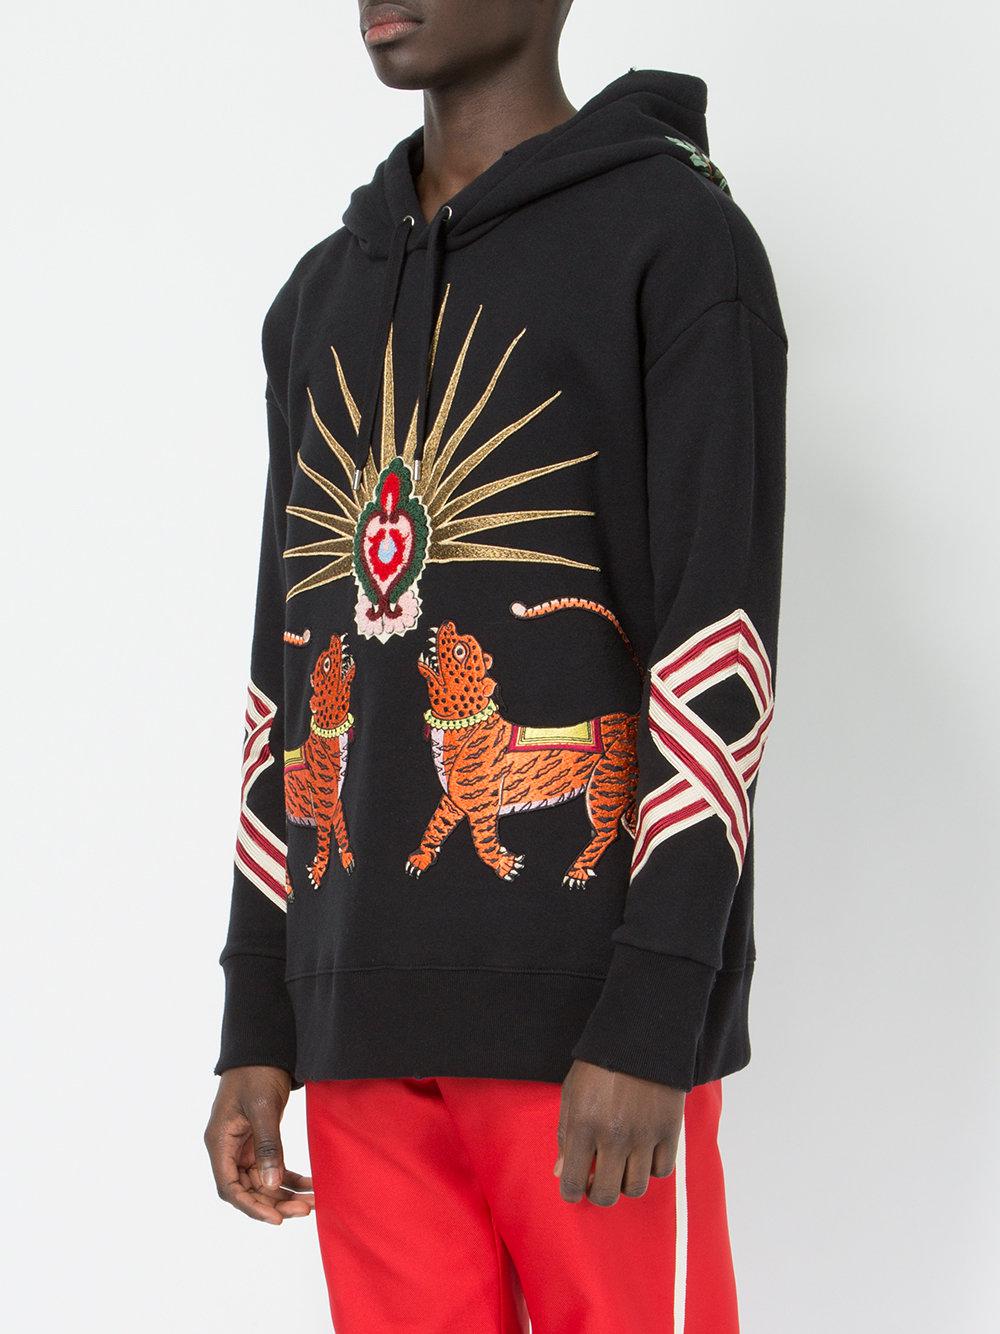 Gucci Tiger Embroidered Hooded Sweatshirt in Black for Men - Lyst